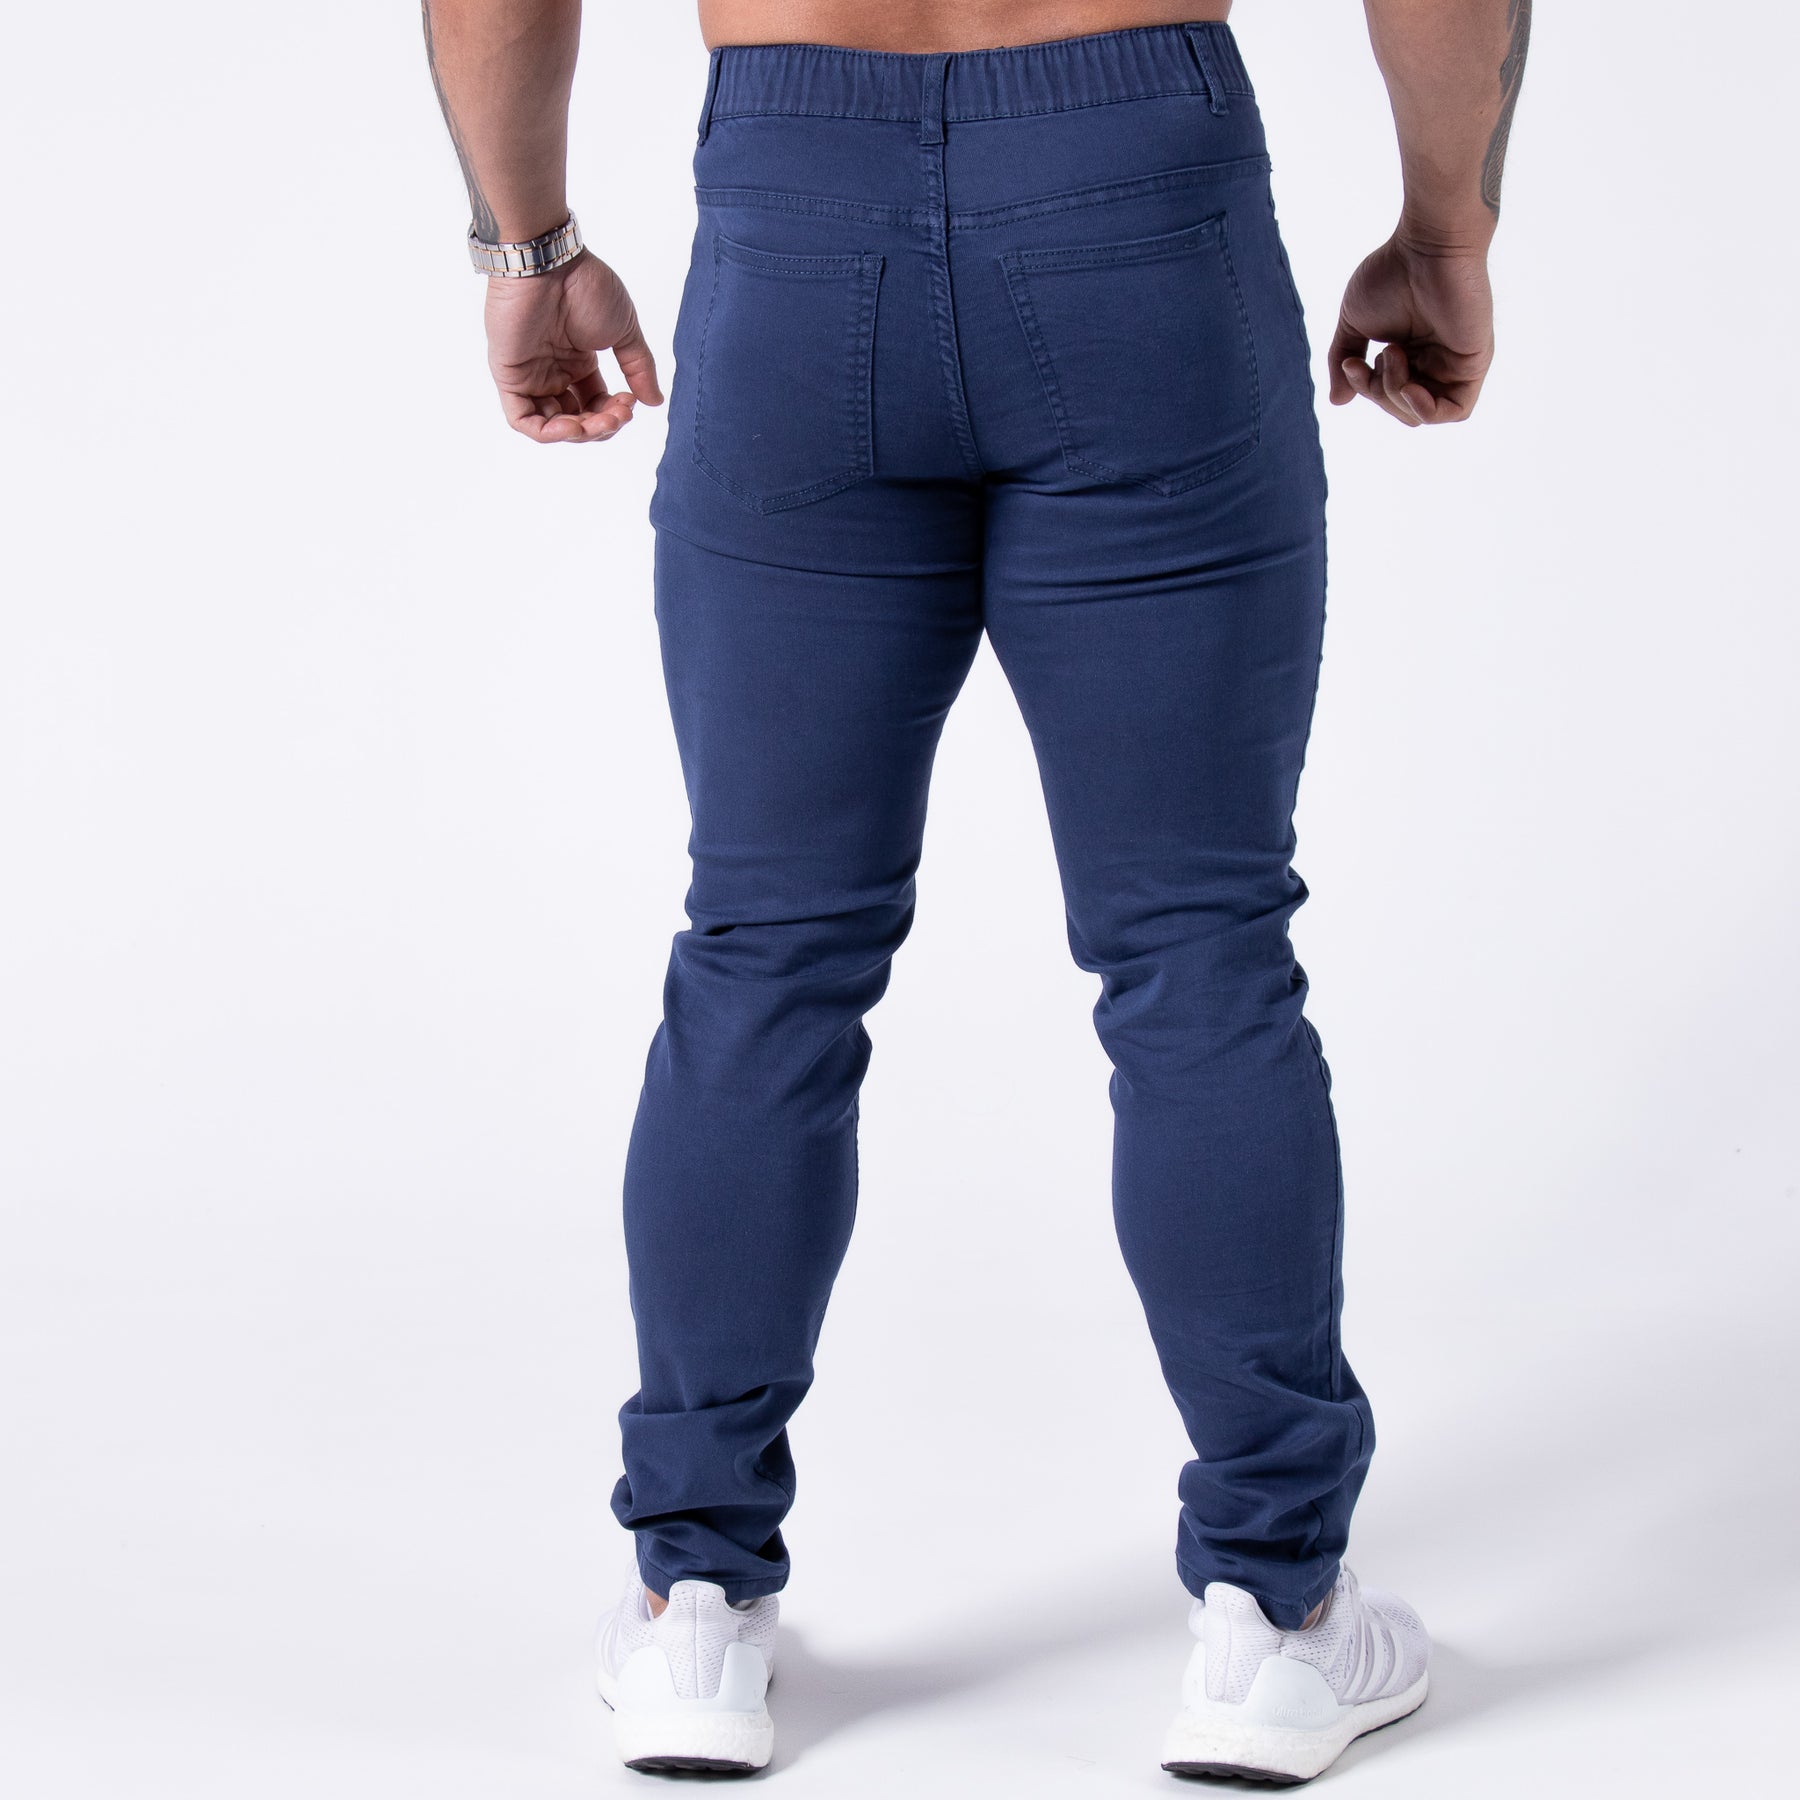 Straight Cut Stretch Jeans - Navy Blue